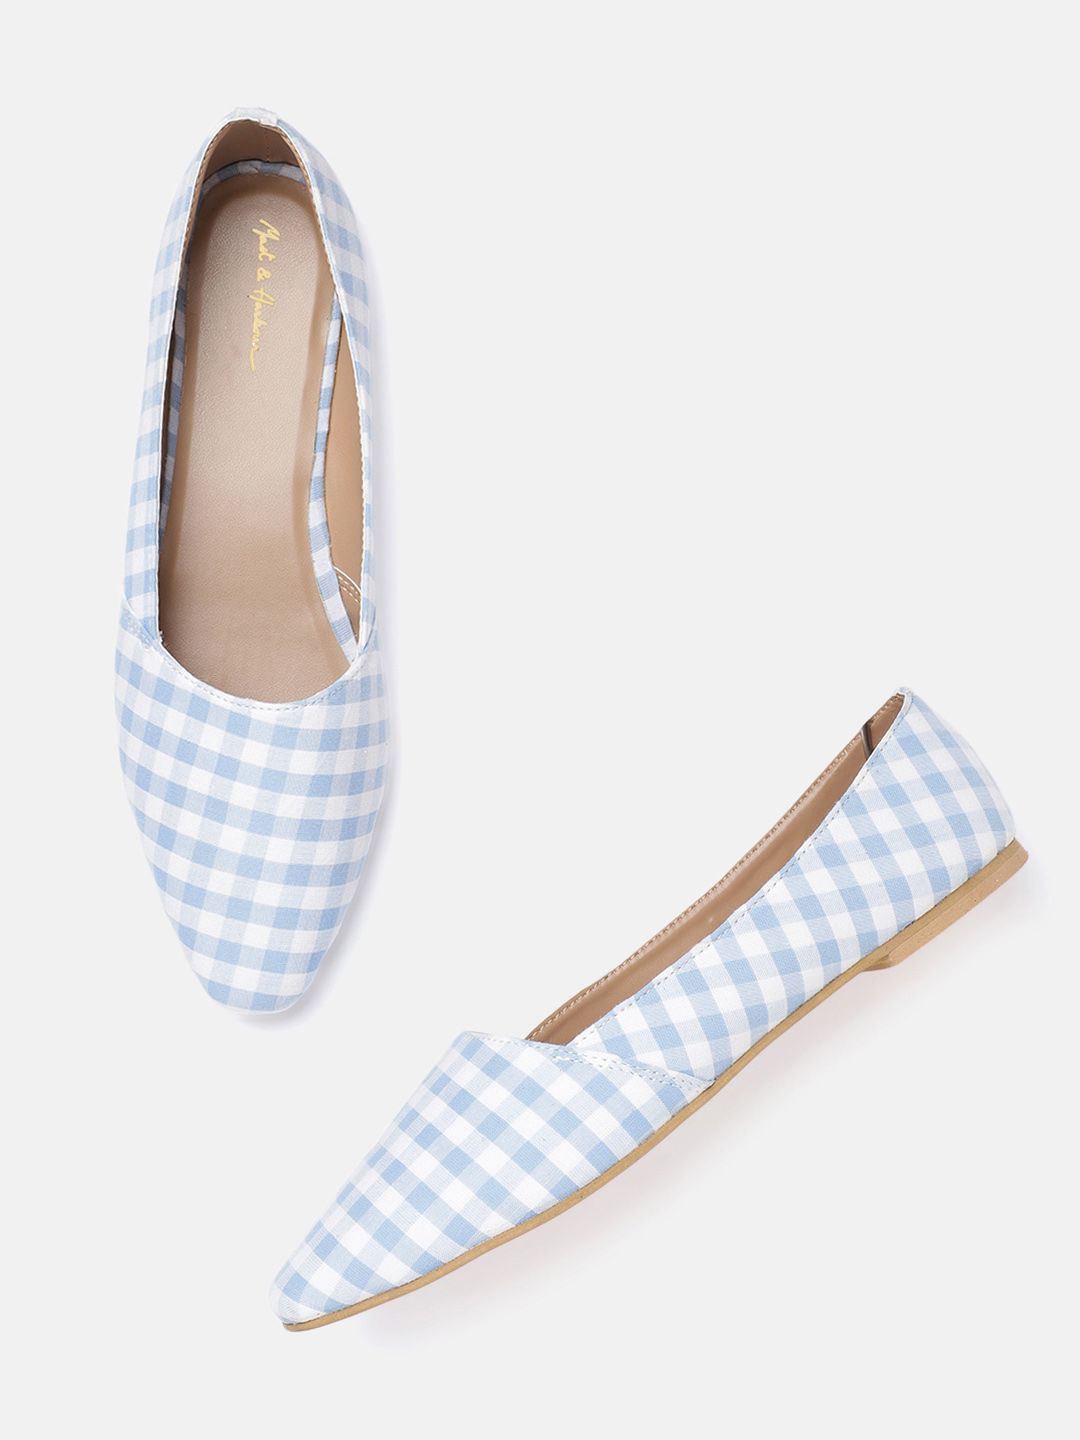 Mast & Harbour Women Blue & White Gingham Checked Ballerinas Price in India